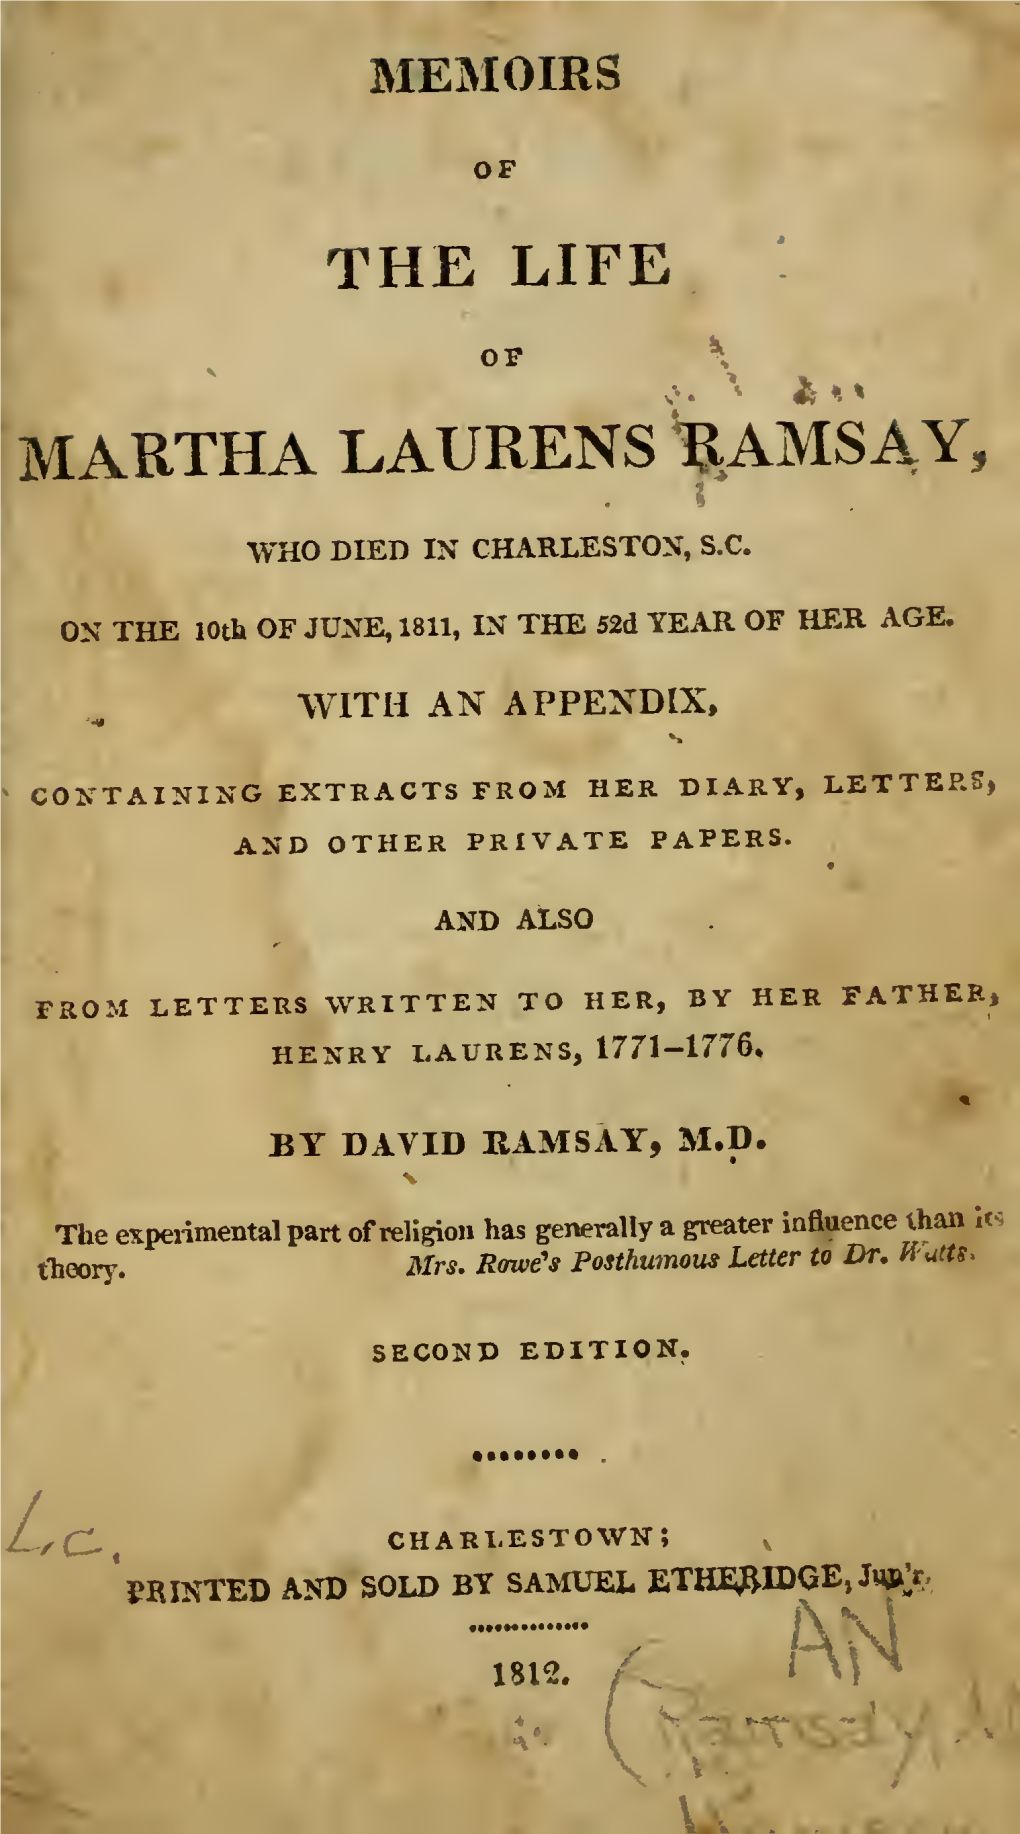 Memoirs of the Life of Martha Laurens Ramsay, Who Died in Charleston